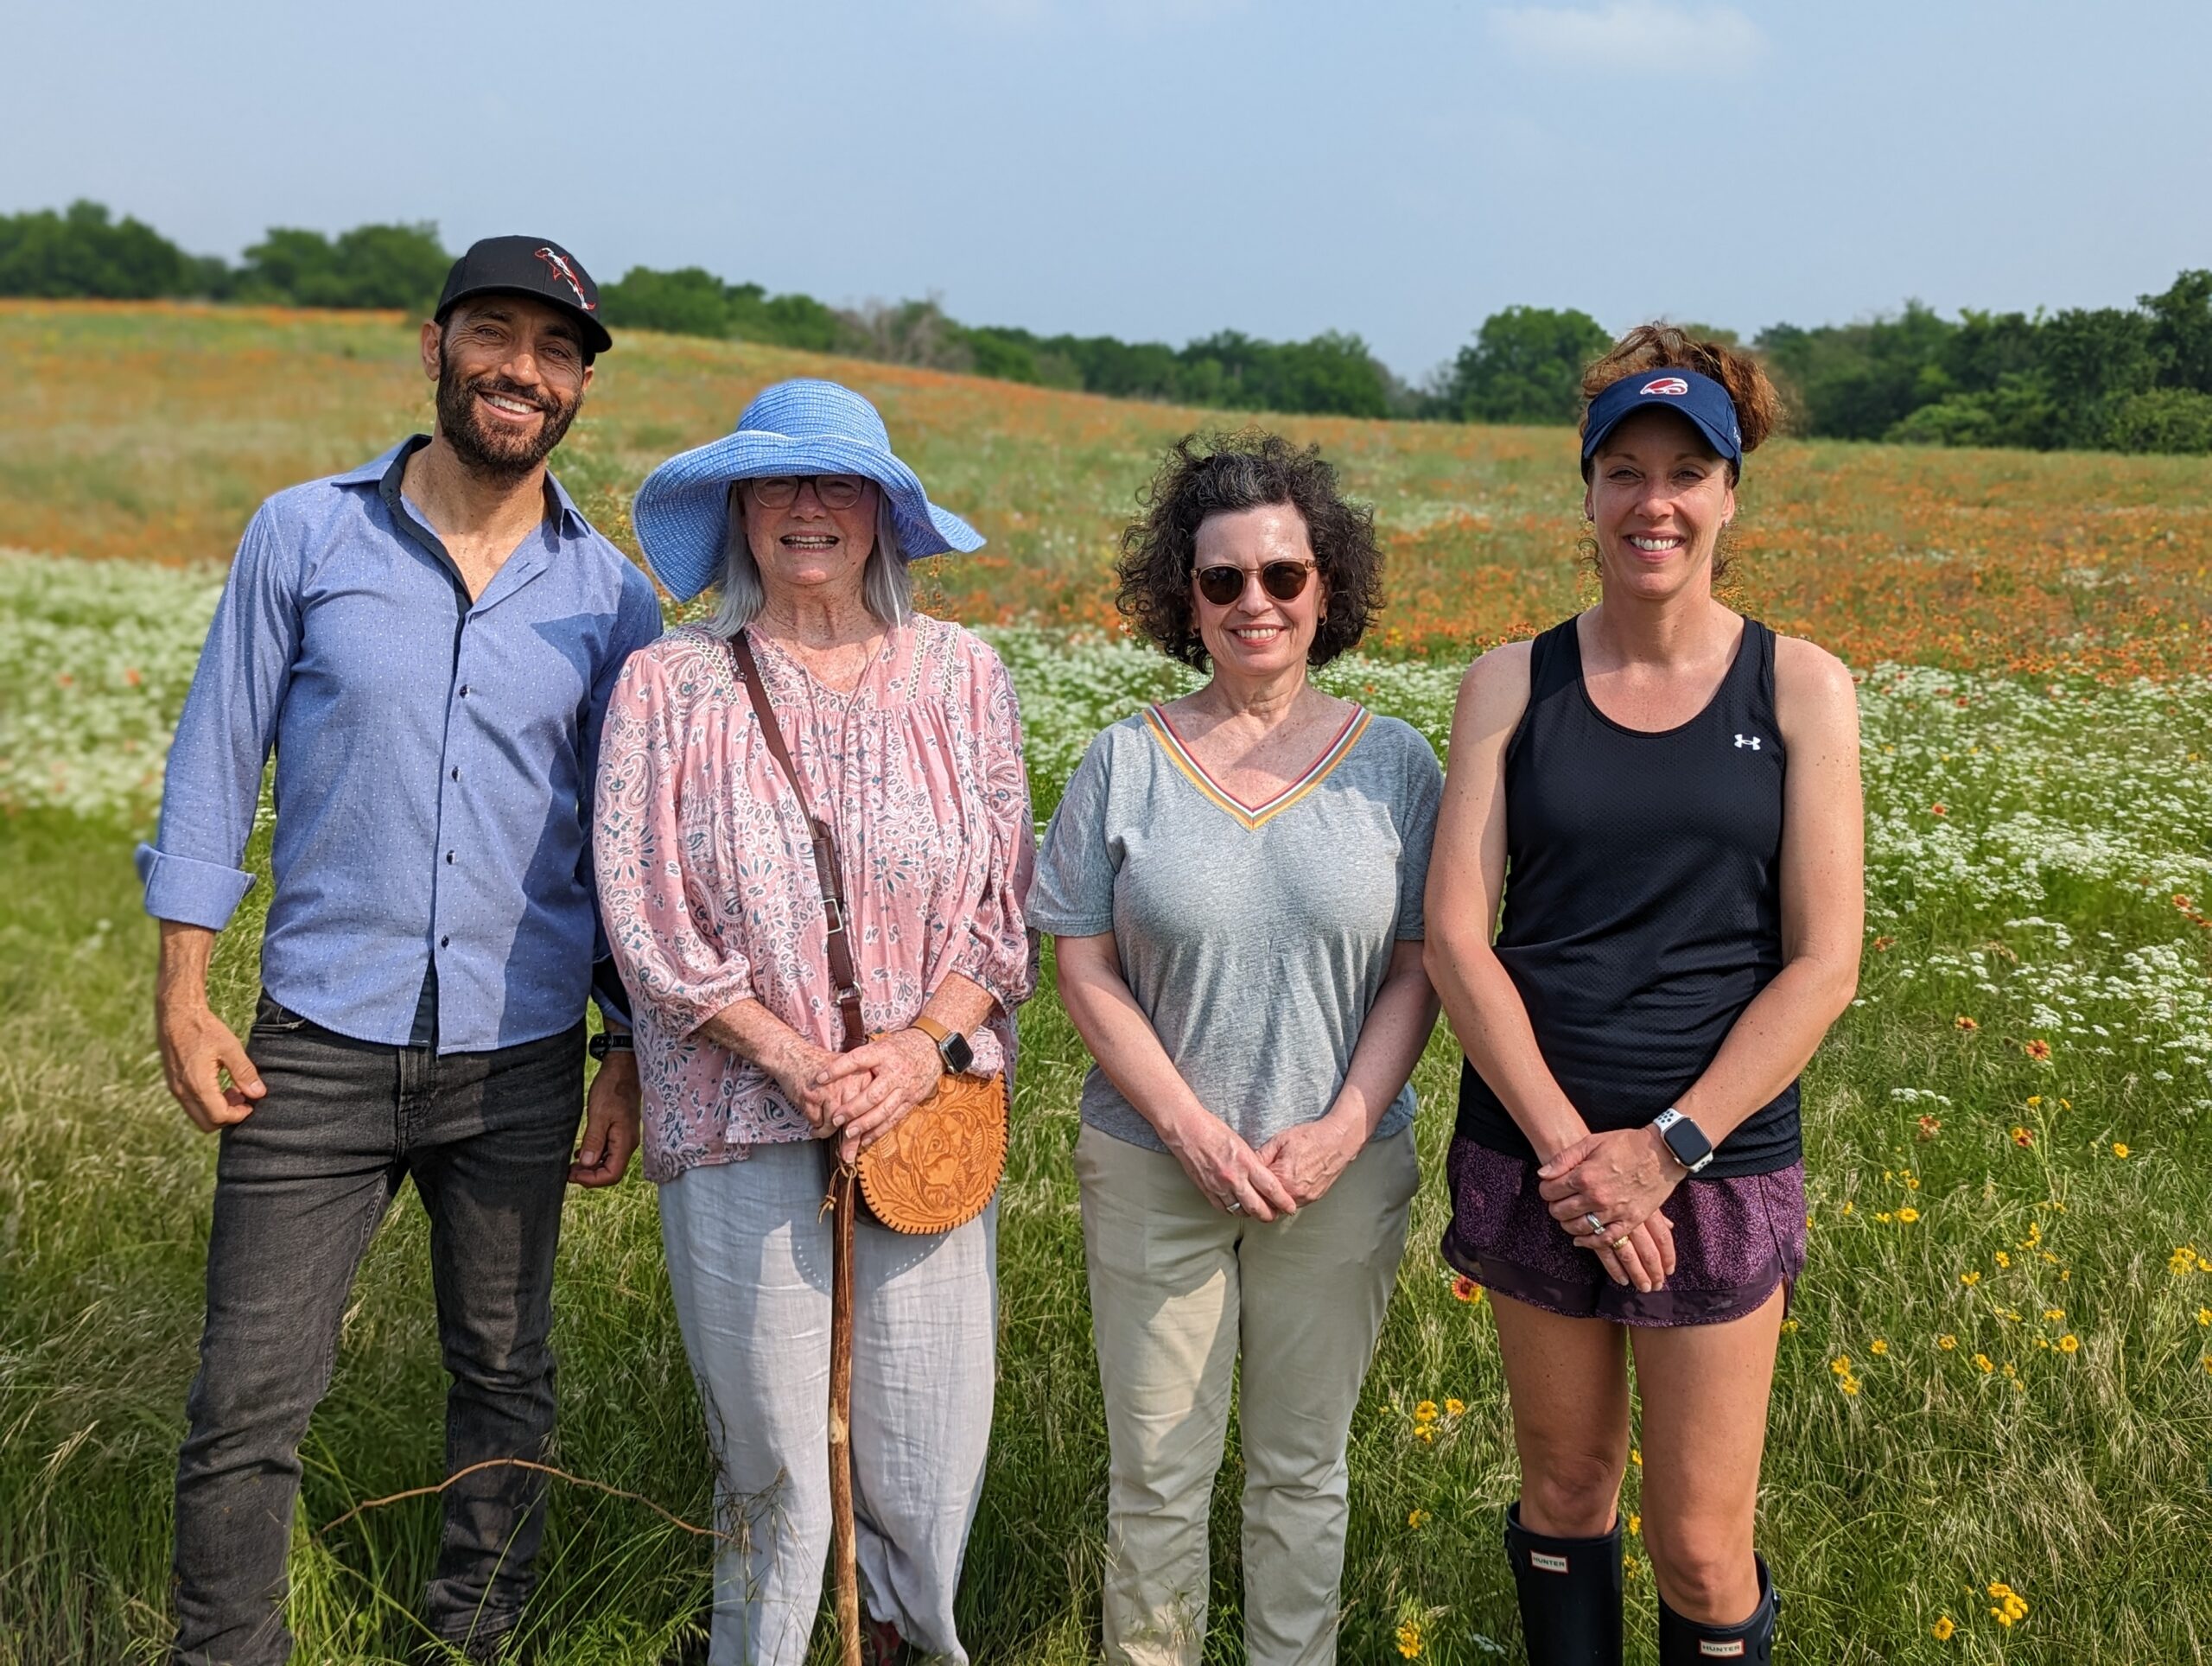 Group photo of 1 man and 3 woman standing in a field